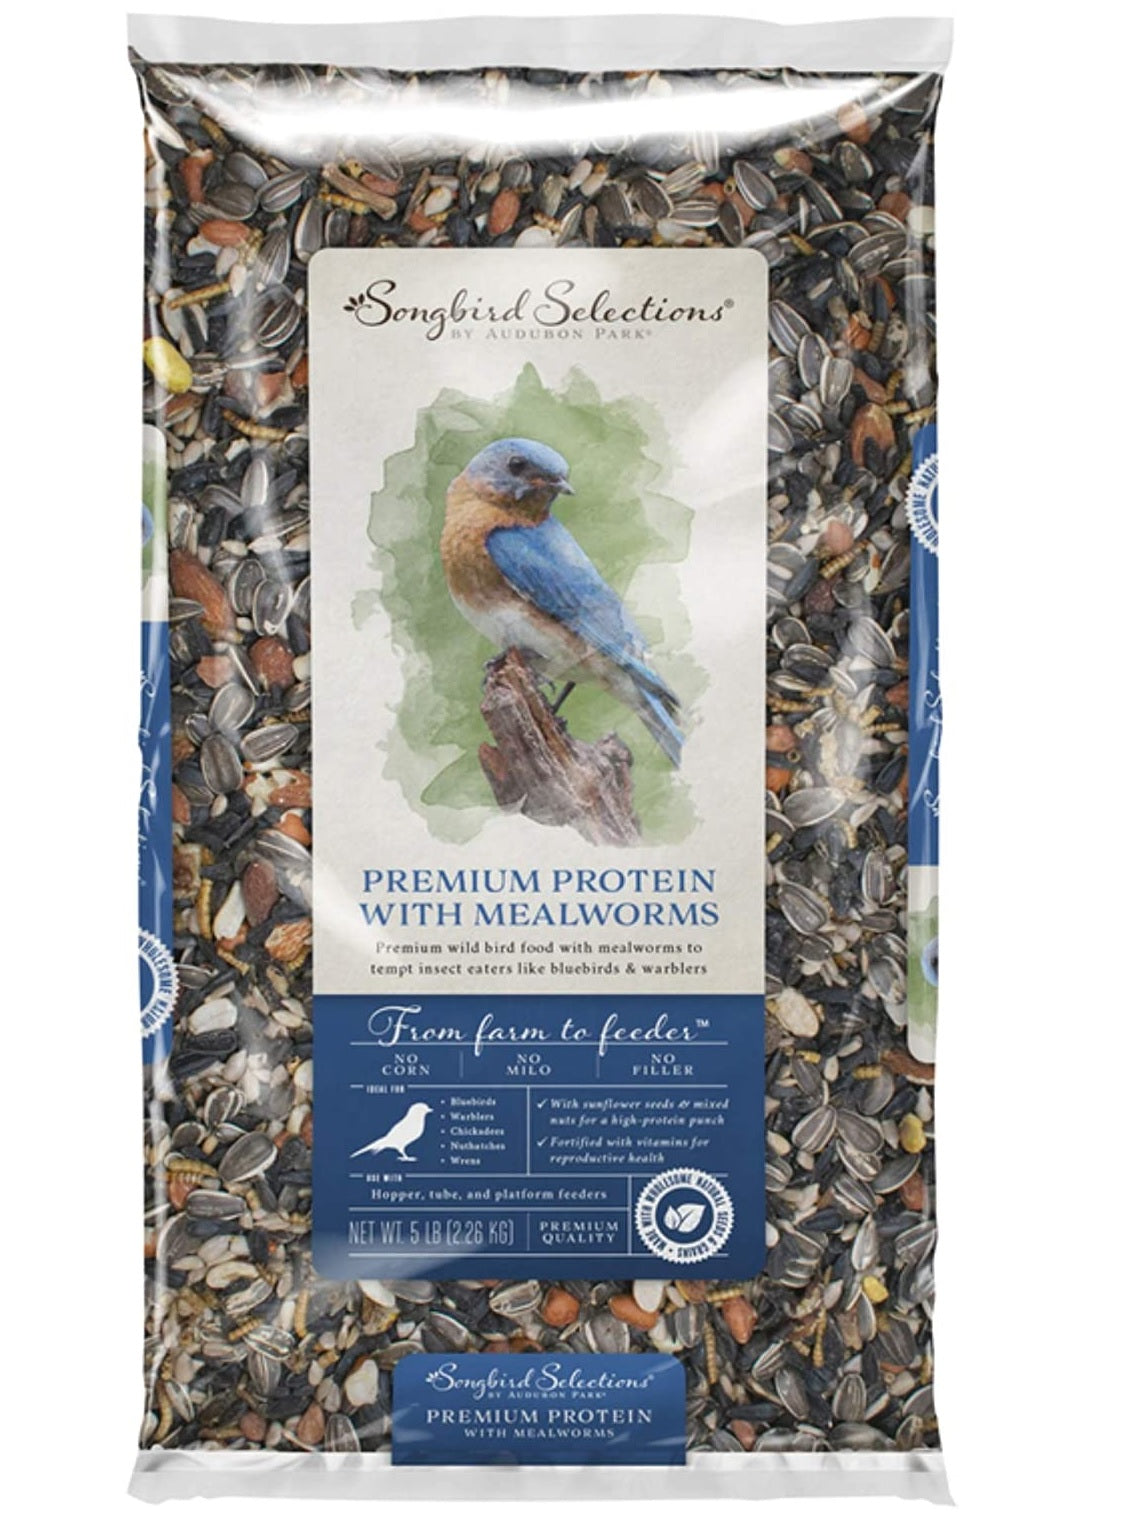 Songbird Selections 13627 Premium Protein with Mealworms Wild Bird Food, 5 Lbs